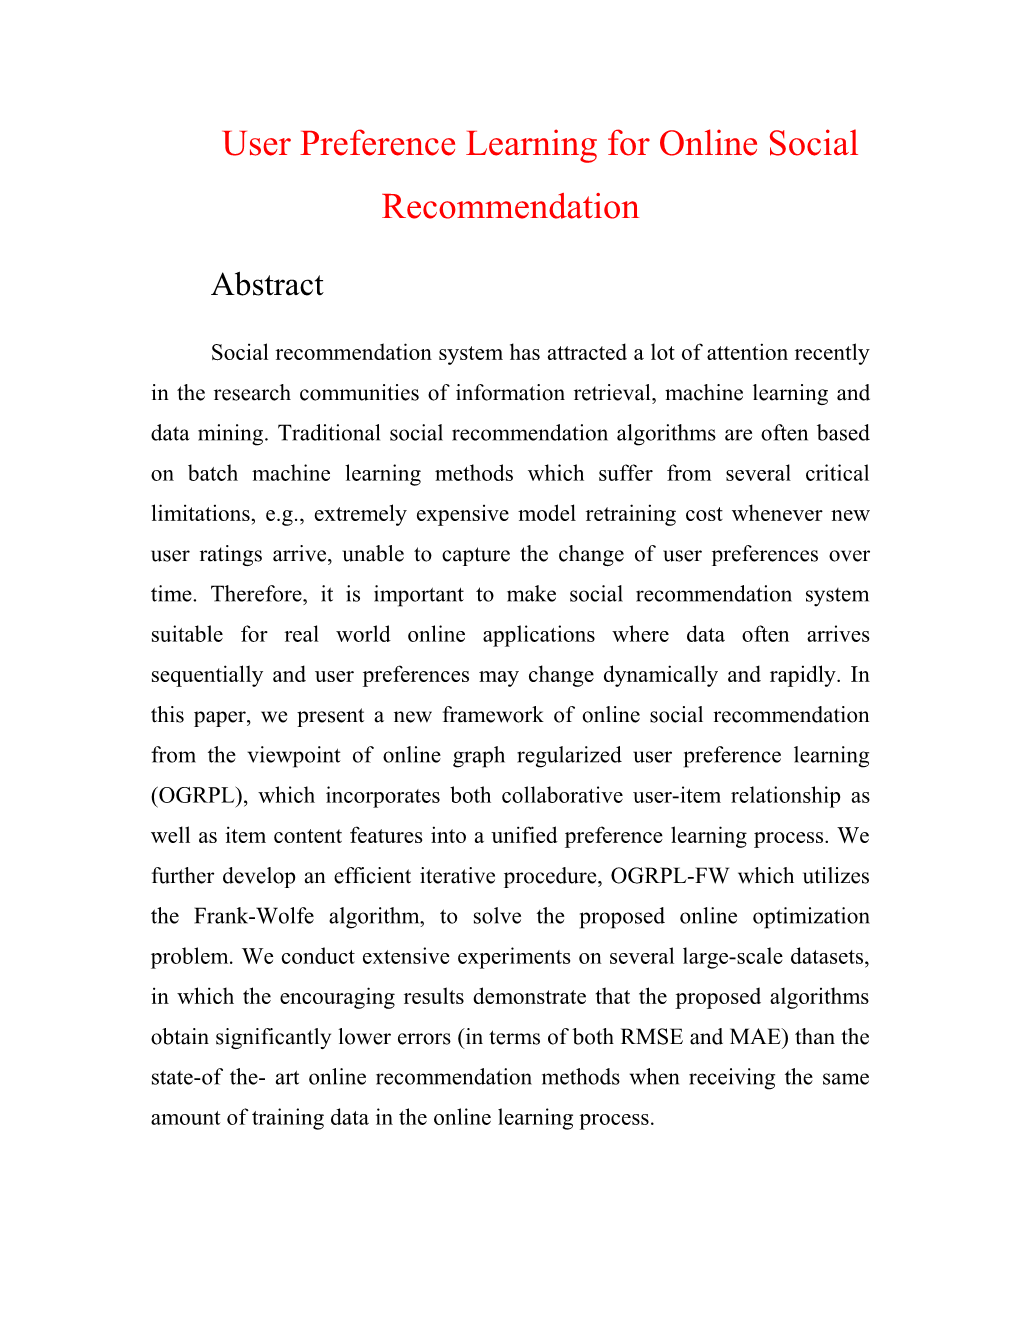 User Preference Learning for Online Social Recommendation